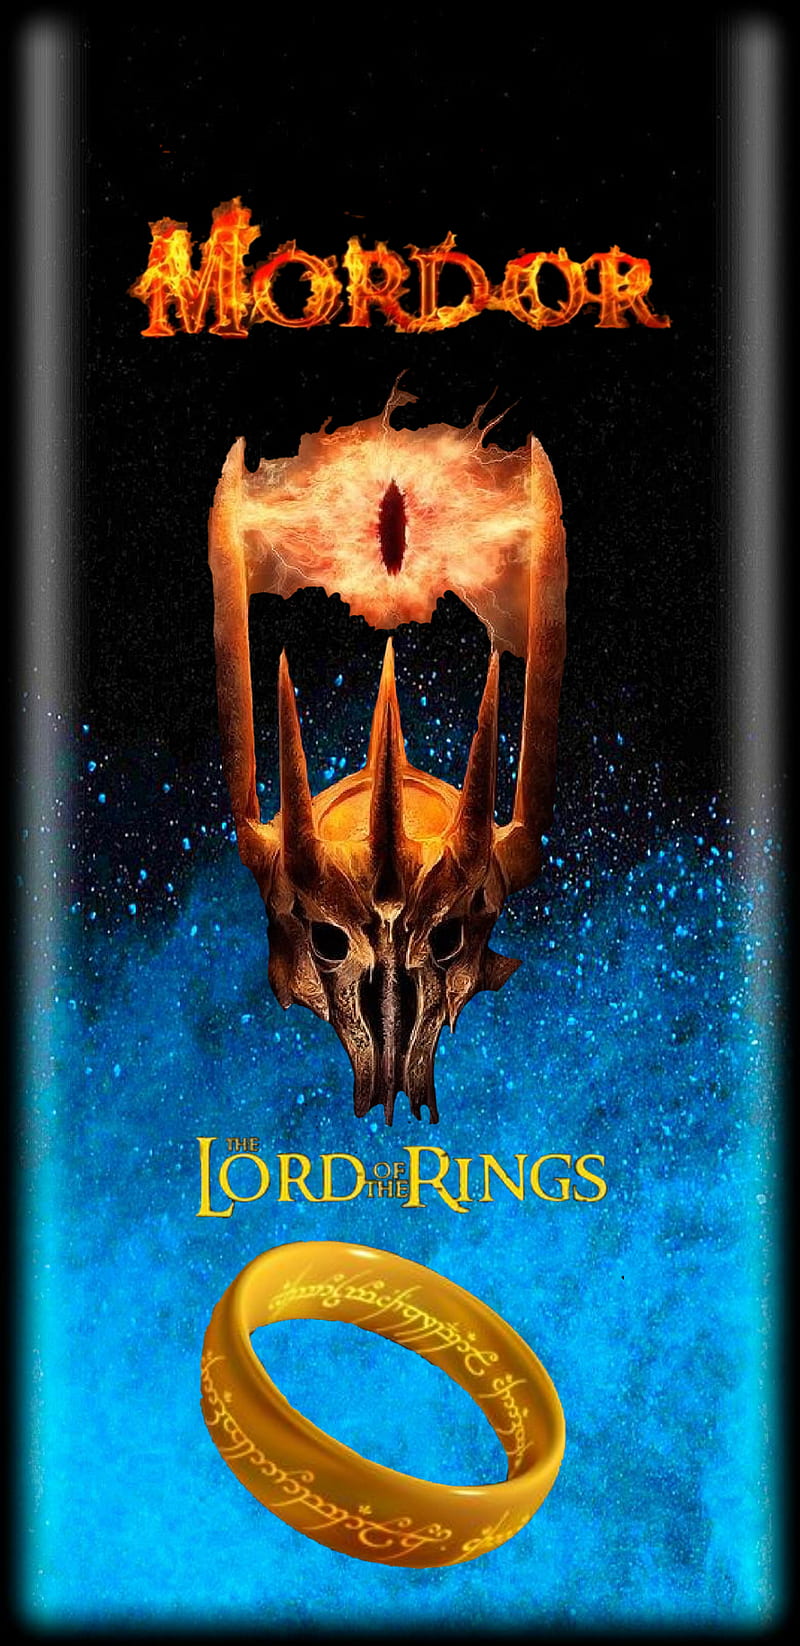 Lord of the Rings, mordor, ring, sauron, HD phone wallpaper